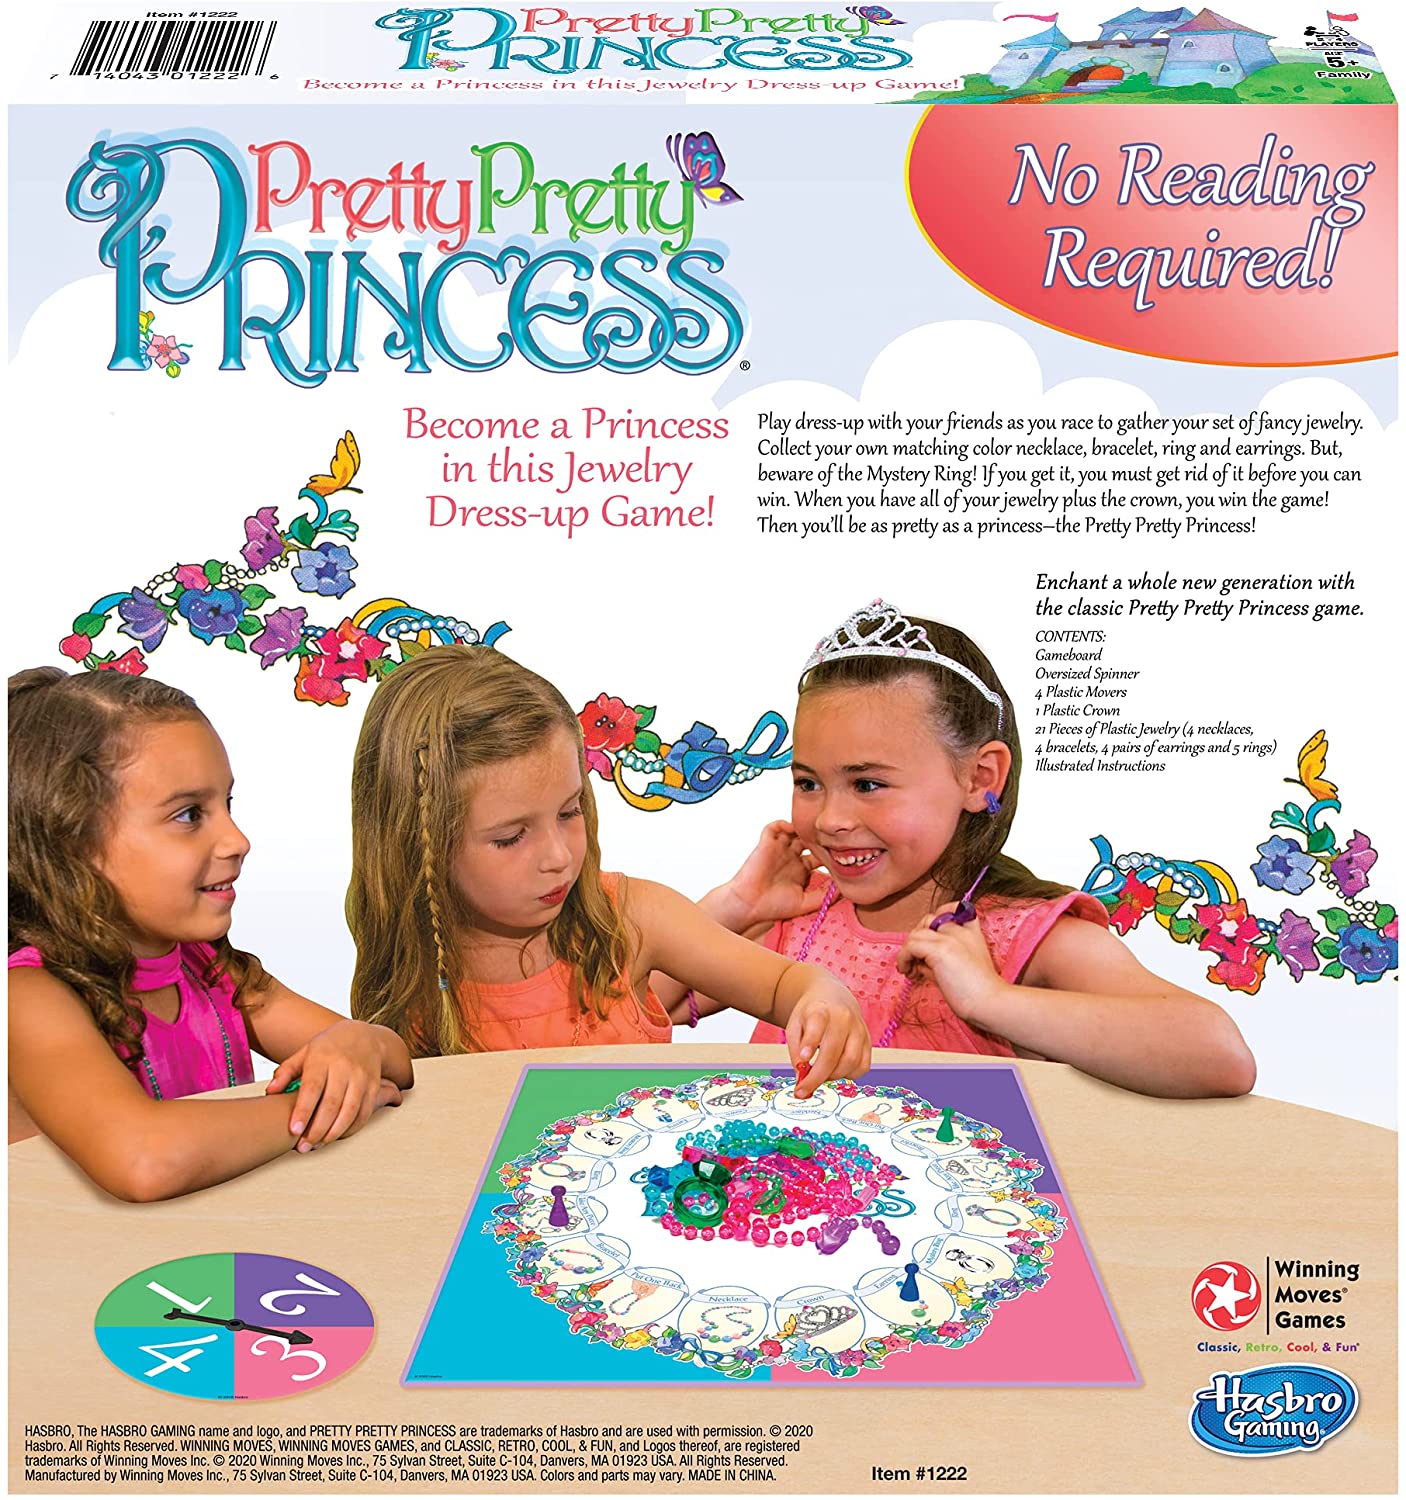 Pretty Pretty Princess Game Jewelry Dress Up Board Game 1990's Classic Toy Tiara Necklaces - image 4 of 6